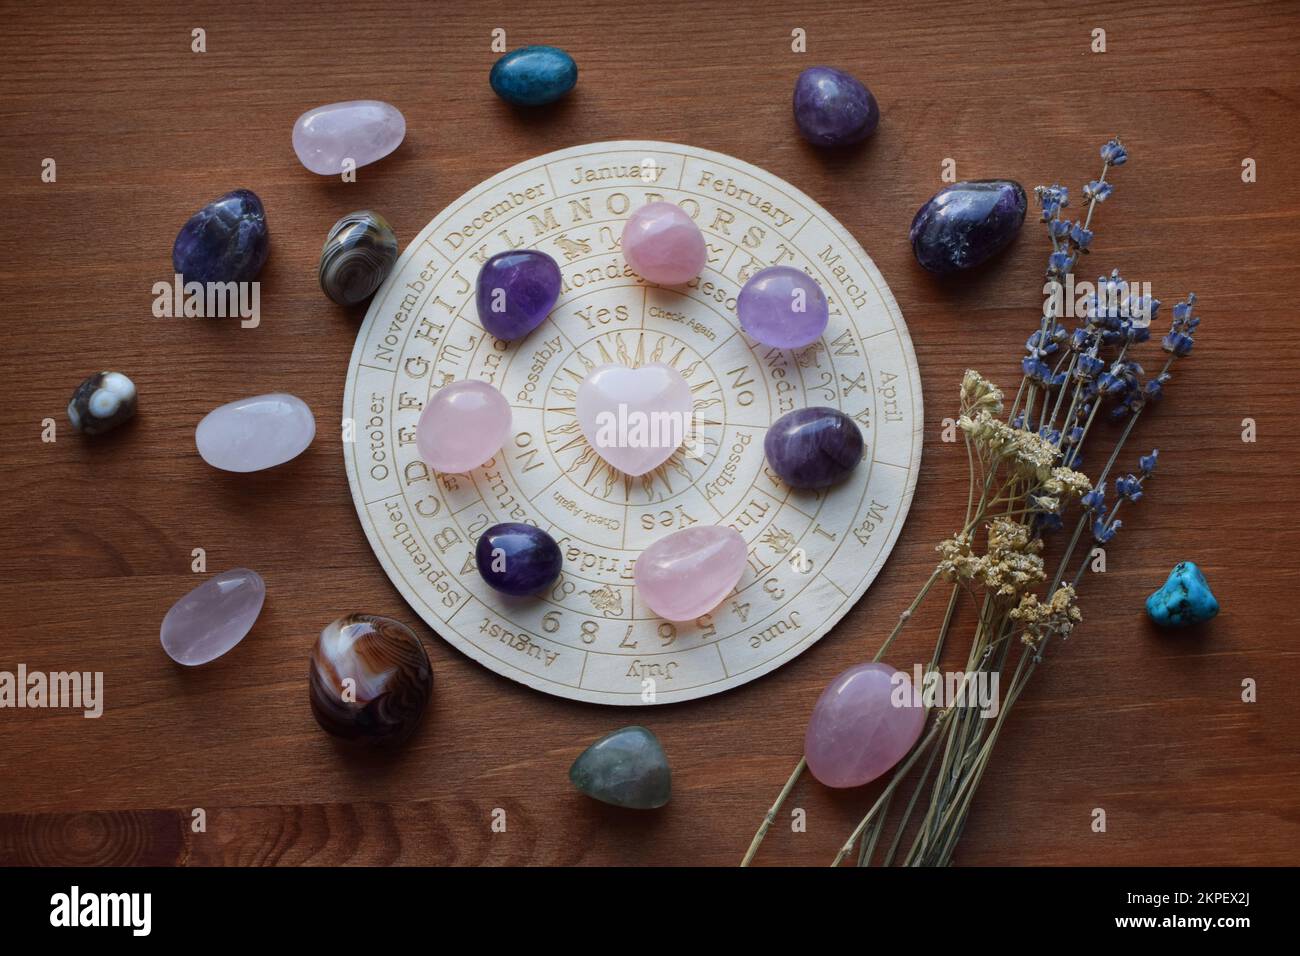 Gemstones for zodiac signs, amethysts and rose quartz on the zodiac chart. Predictions, witchcraft, spiritual esoteric practice. Stock Photo